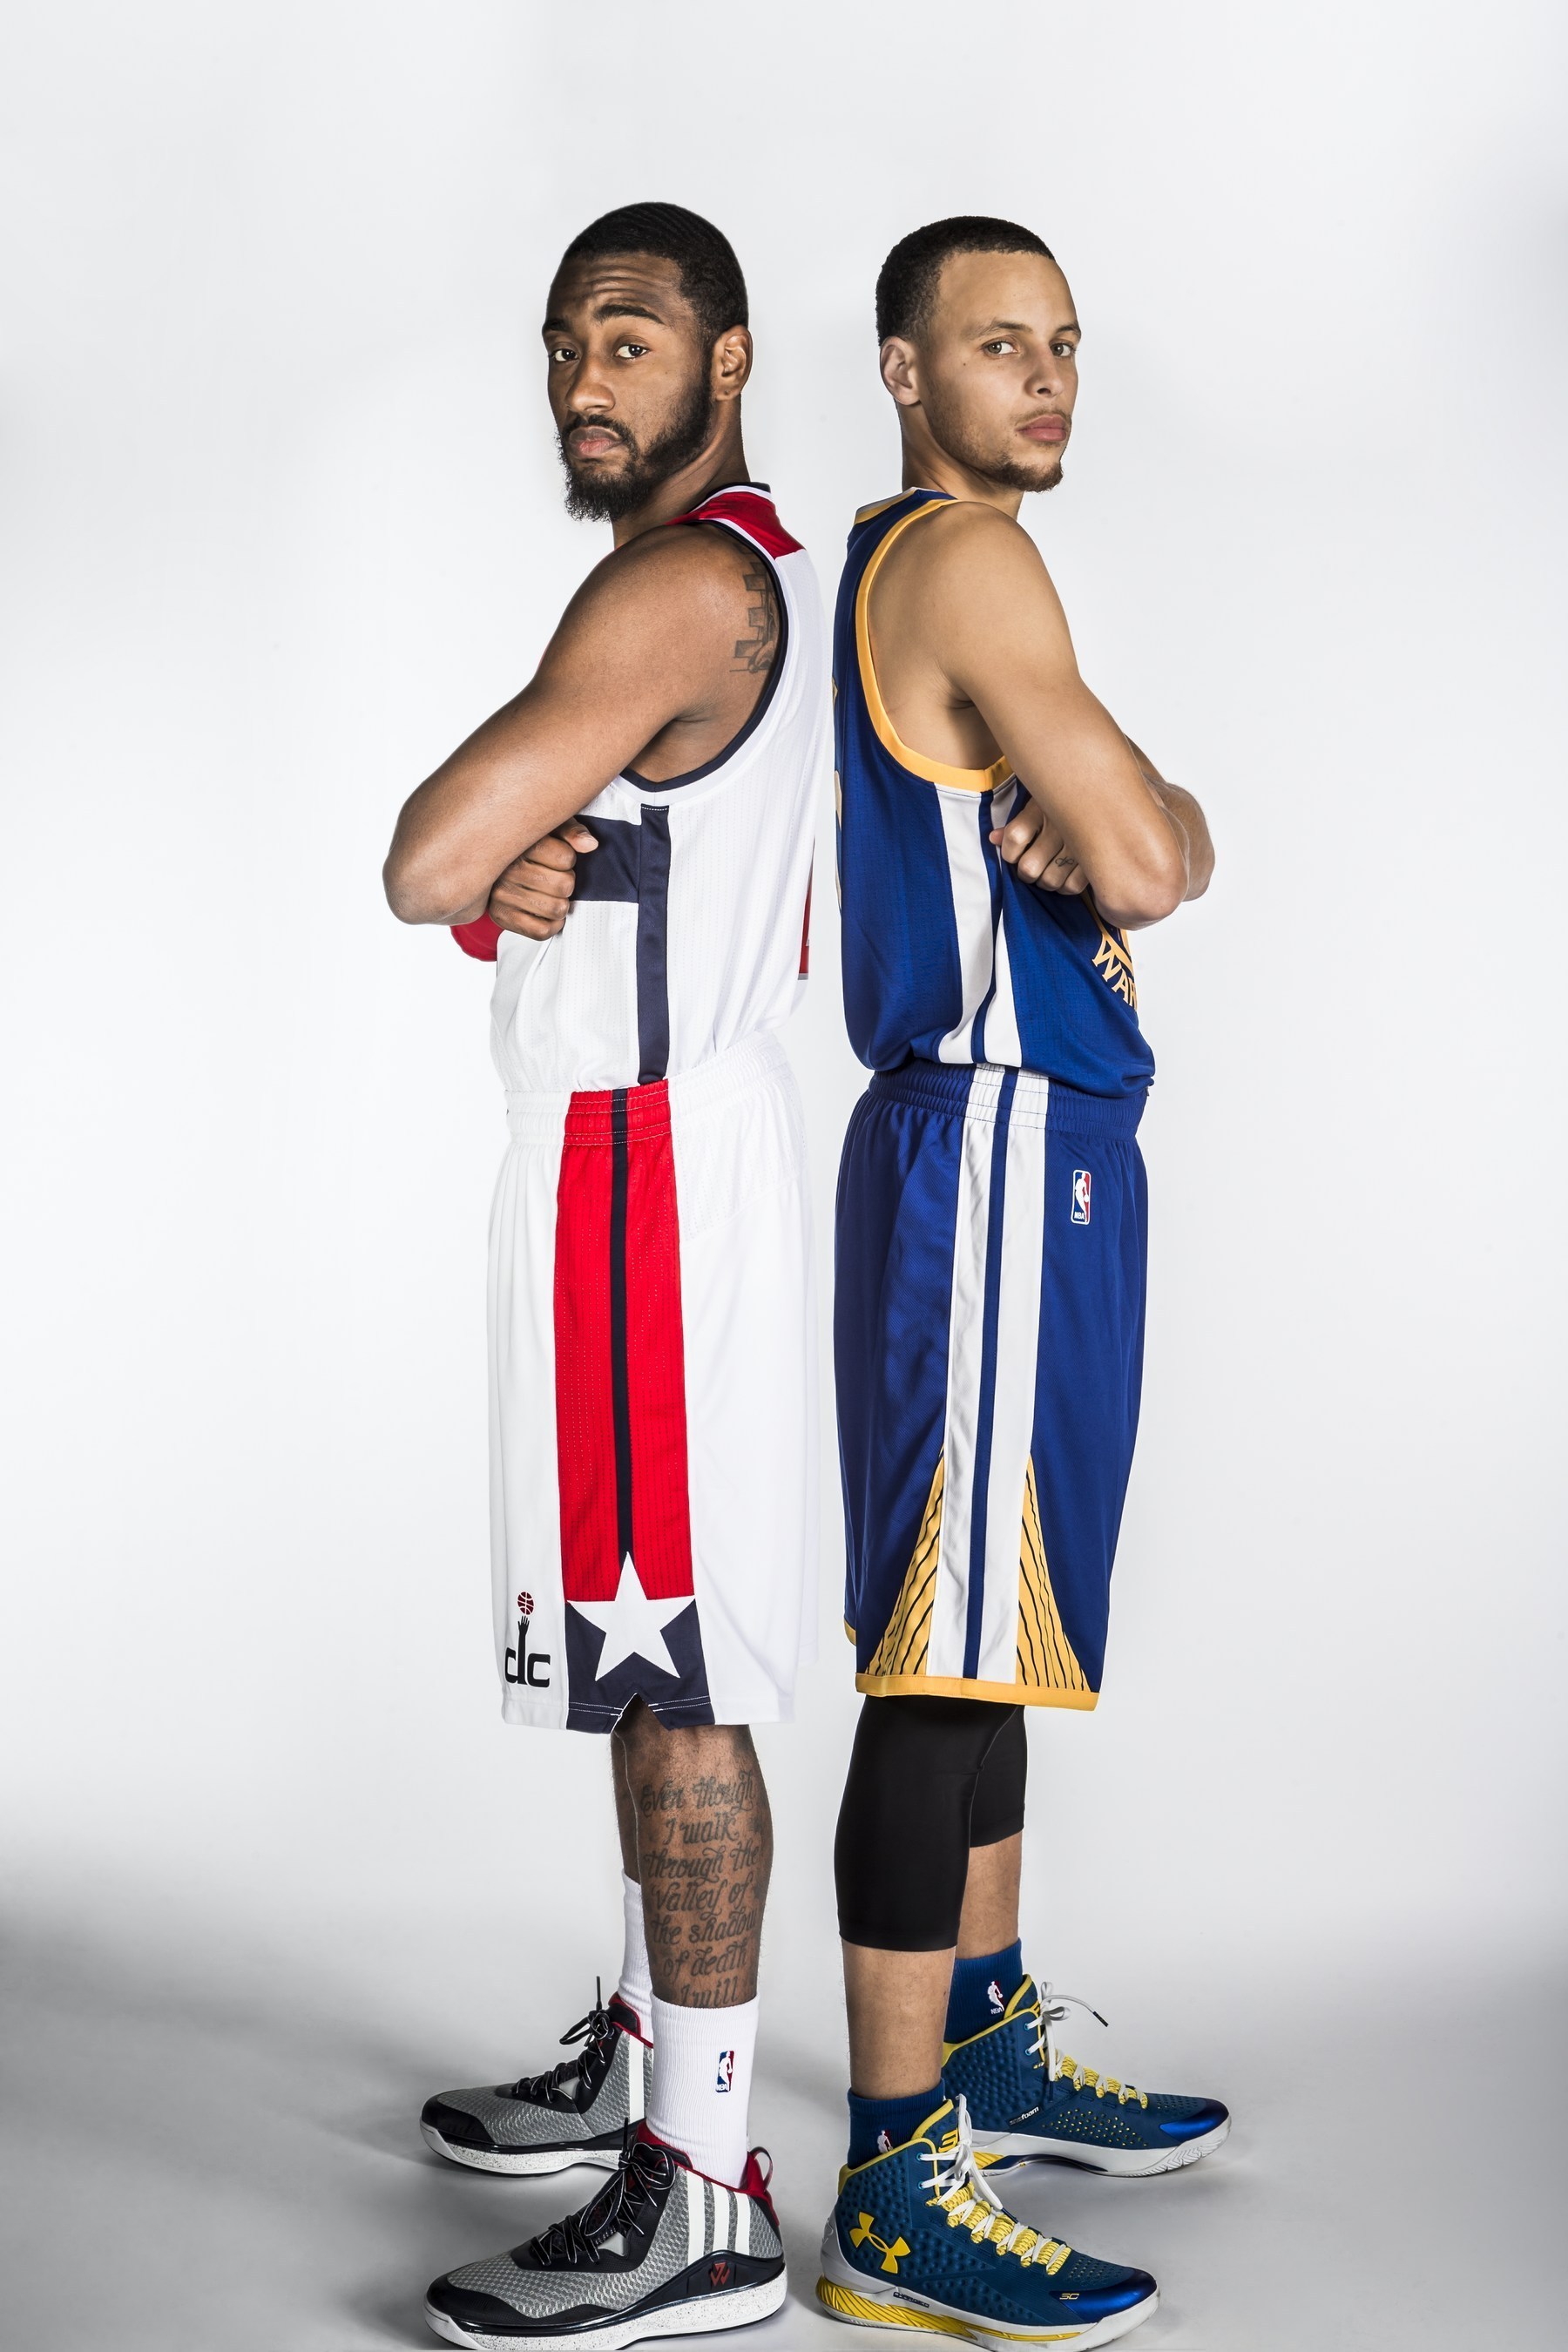 All-Star starters Stephen Curry and John Wall will go shot-for-shot in the 'Degree(R) Battle of the Game Changers' on Saturday February 14.